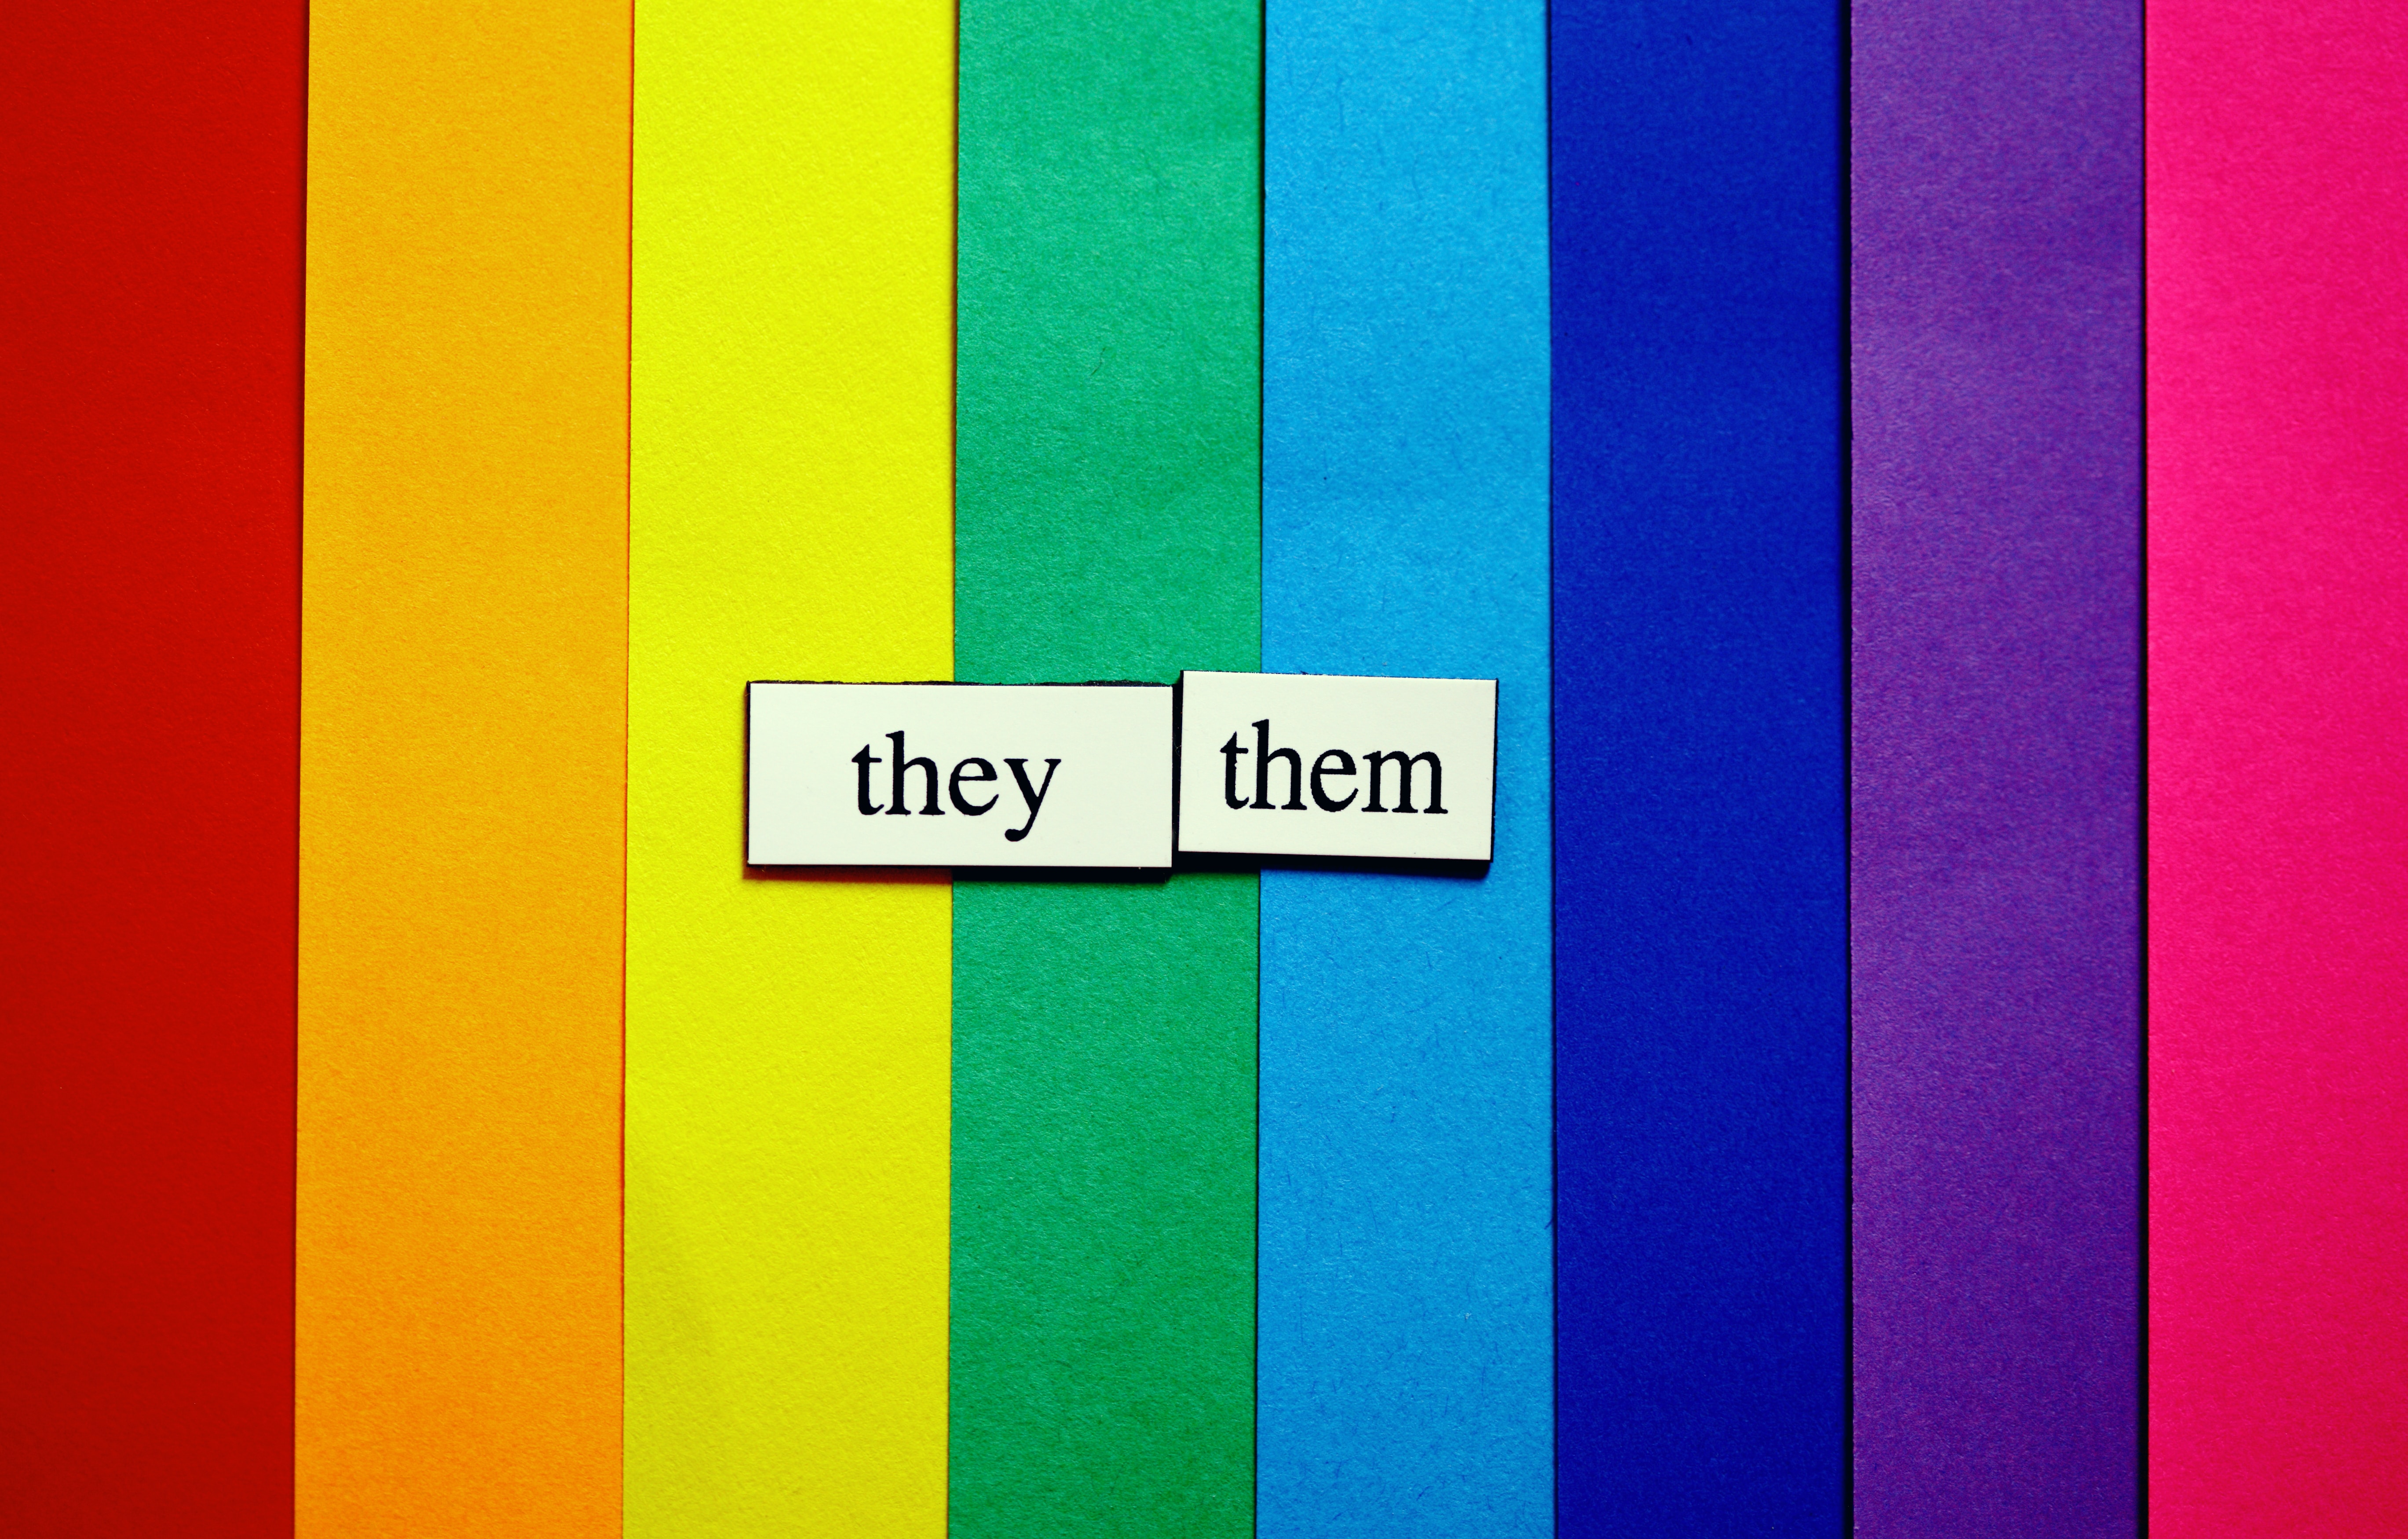 a rainbow background with two rectangles in front that read "they" and "them"